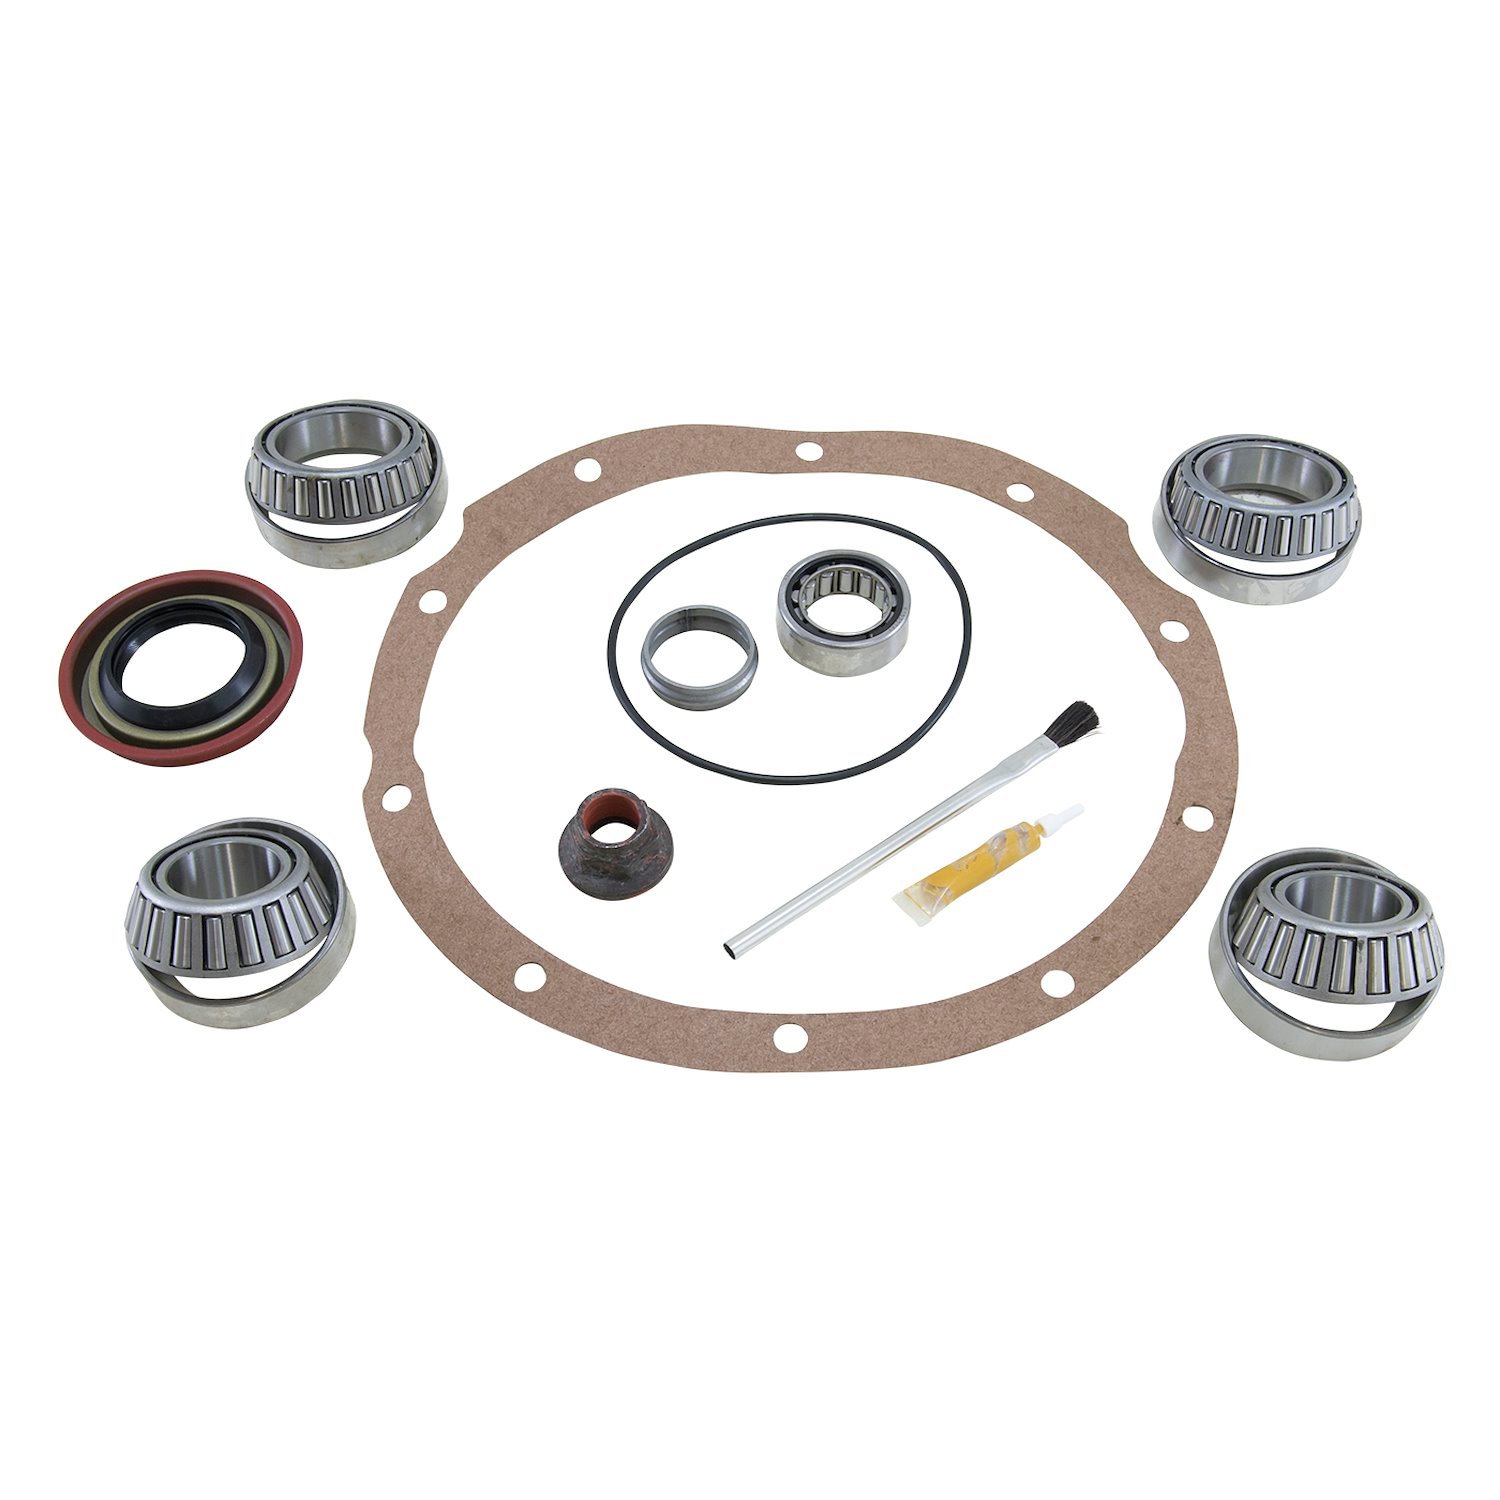 Bearing Install Kit For Ford Daytona 9 in. Differential, Lm501310 Bearings